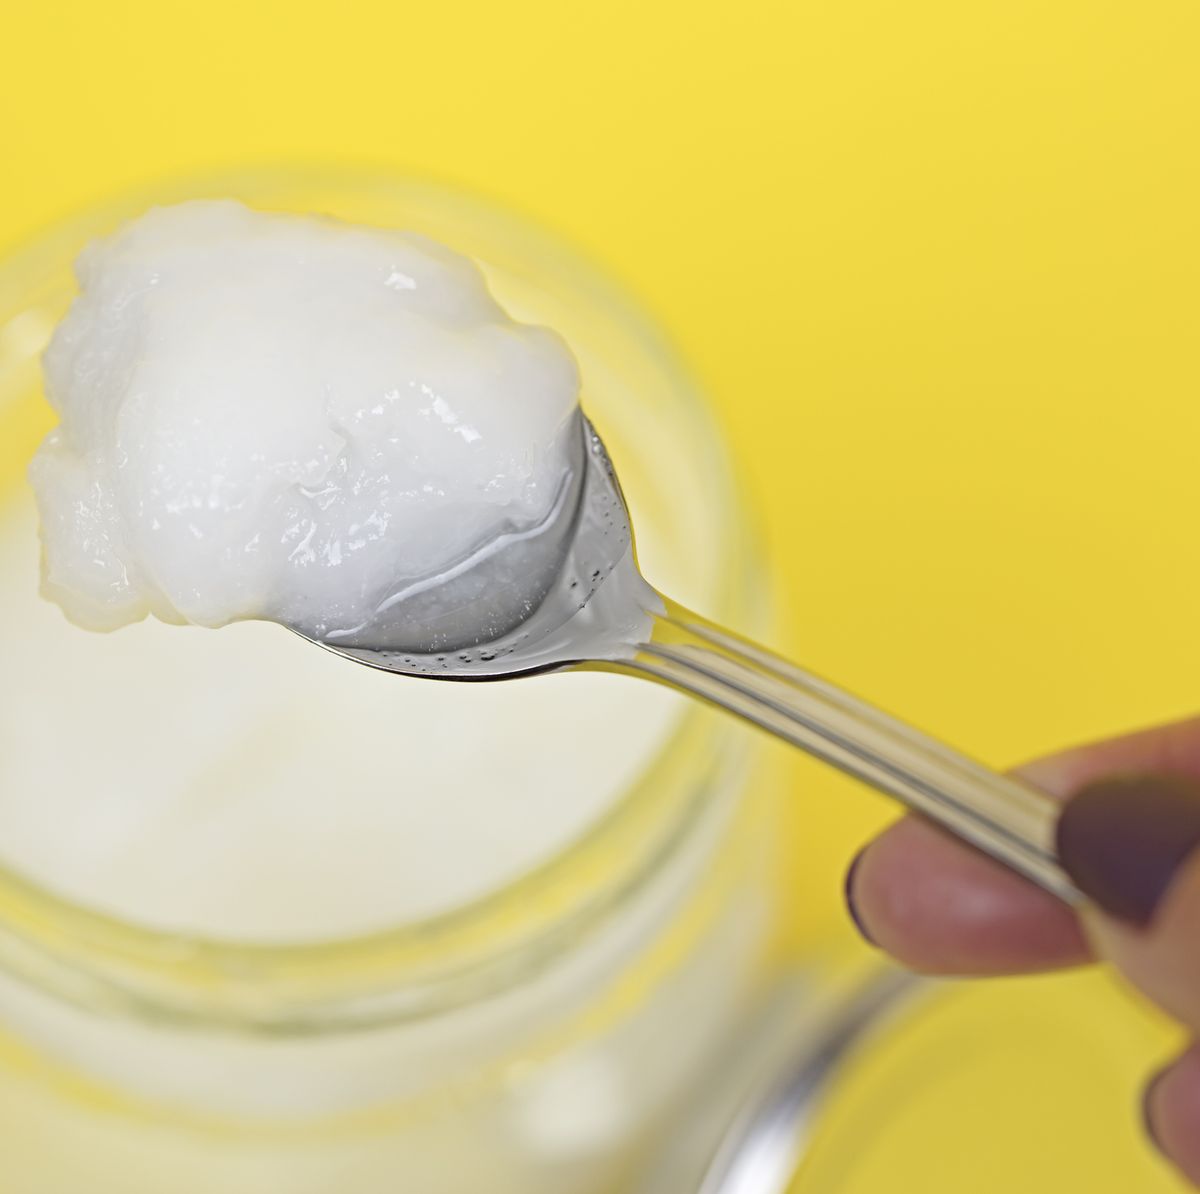 Coconut oil in jar with spoon